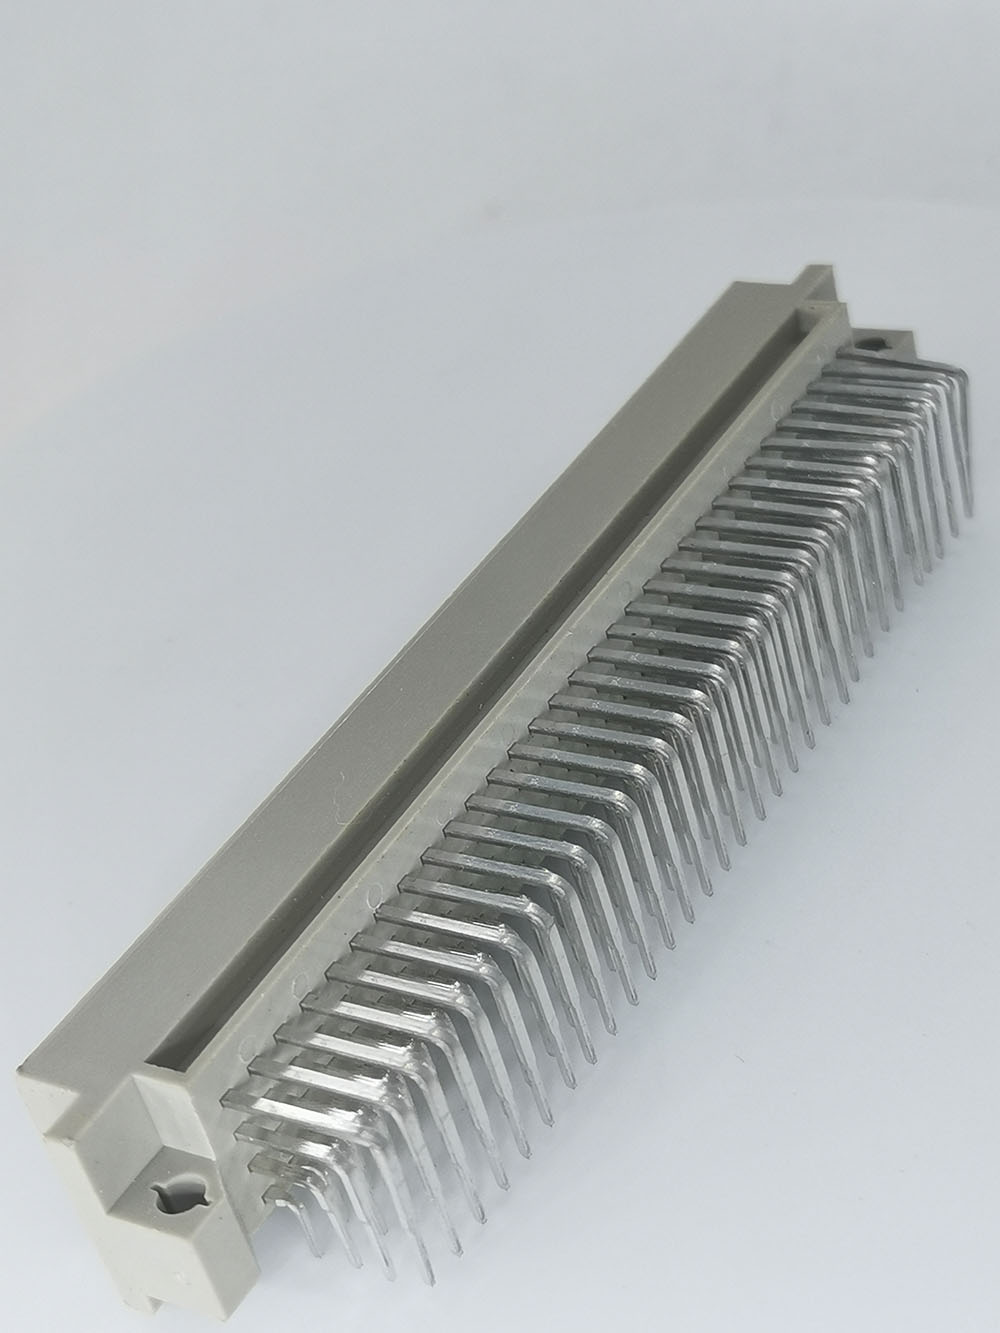 128 Pin Type C Male IEC 60603-2 Connectors